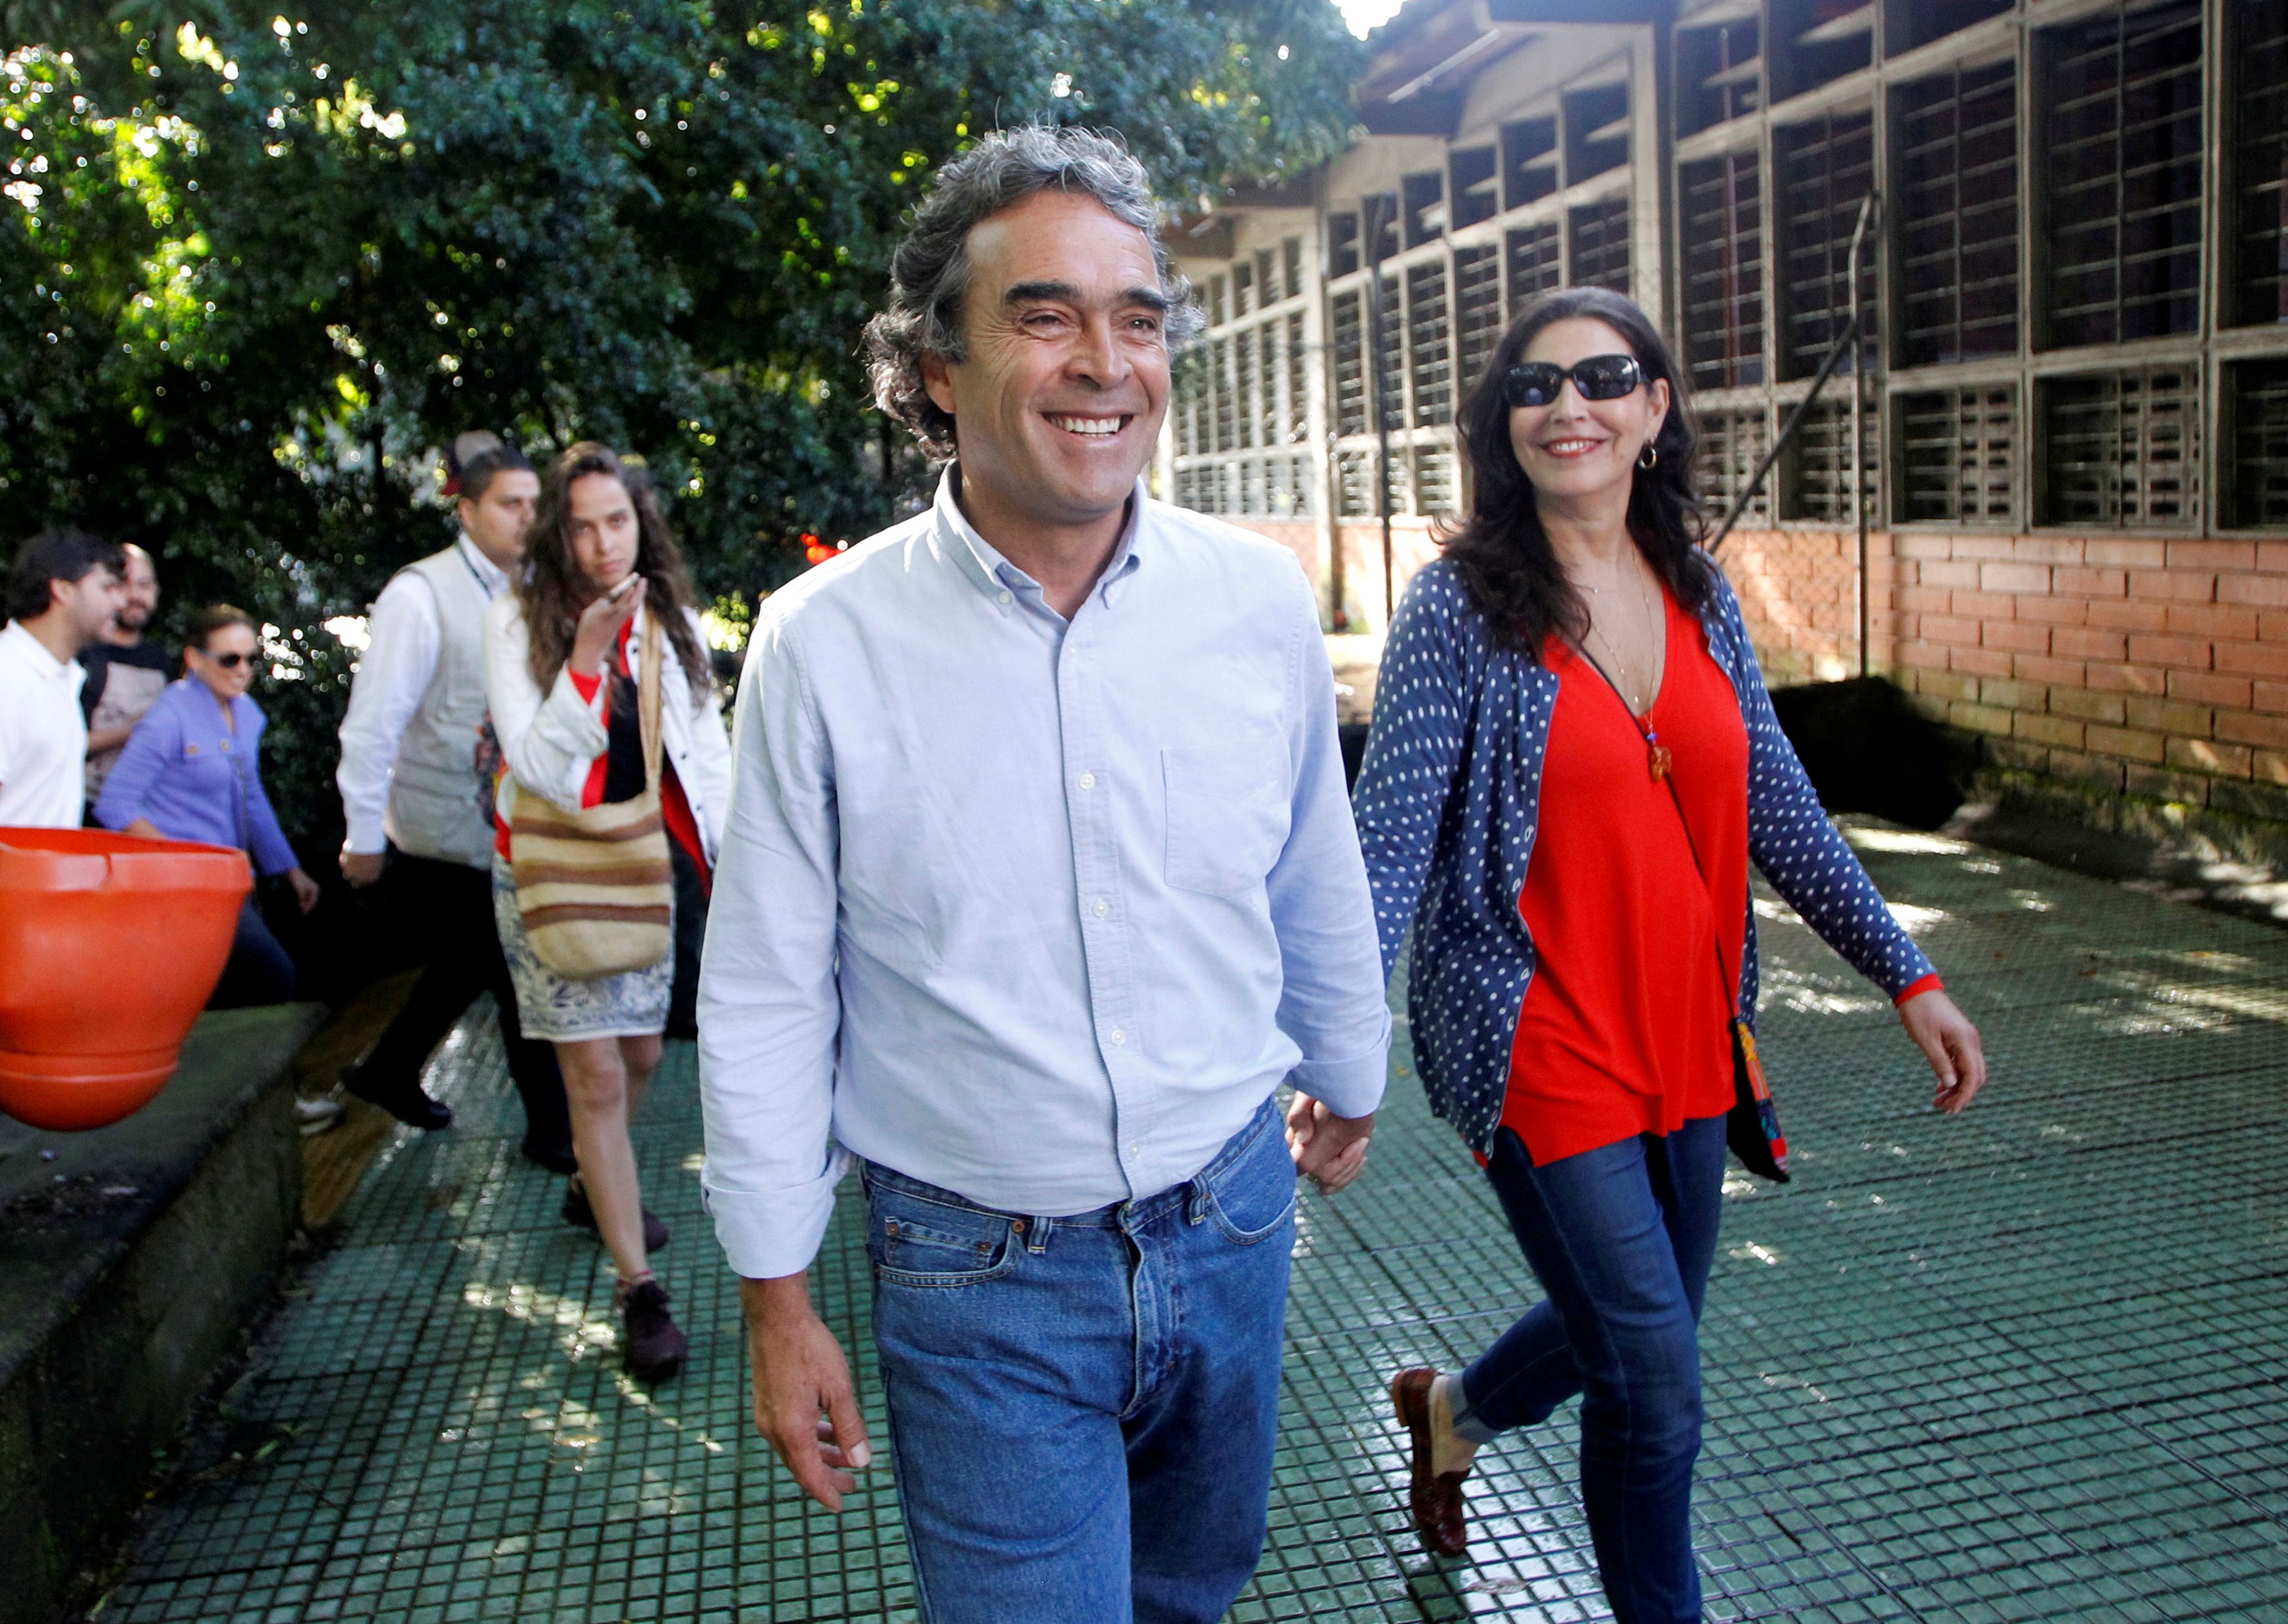 FILE PHOTO: Presidential candidate Sergio Fajardo walks with his wife Ana Lucrecia Ramirez as Colombians vote for a new president in Medellin, Colombia, May 27, 2018. REUTERS/Fredy Builes//File Photo